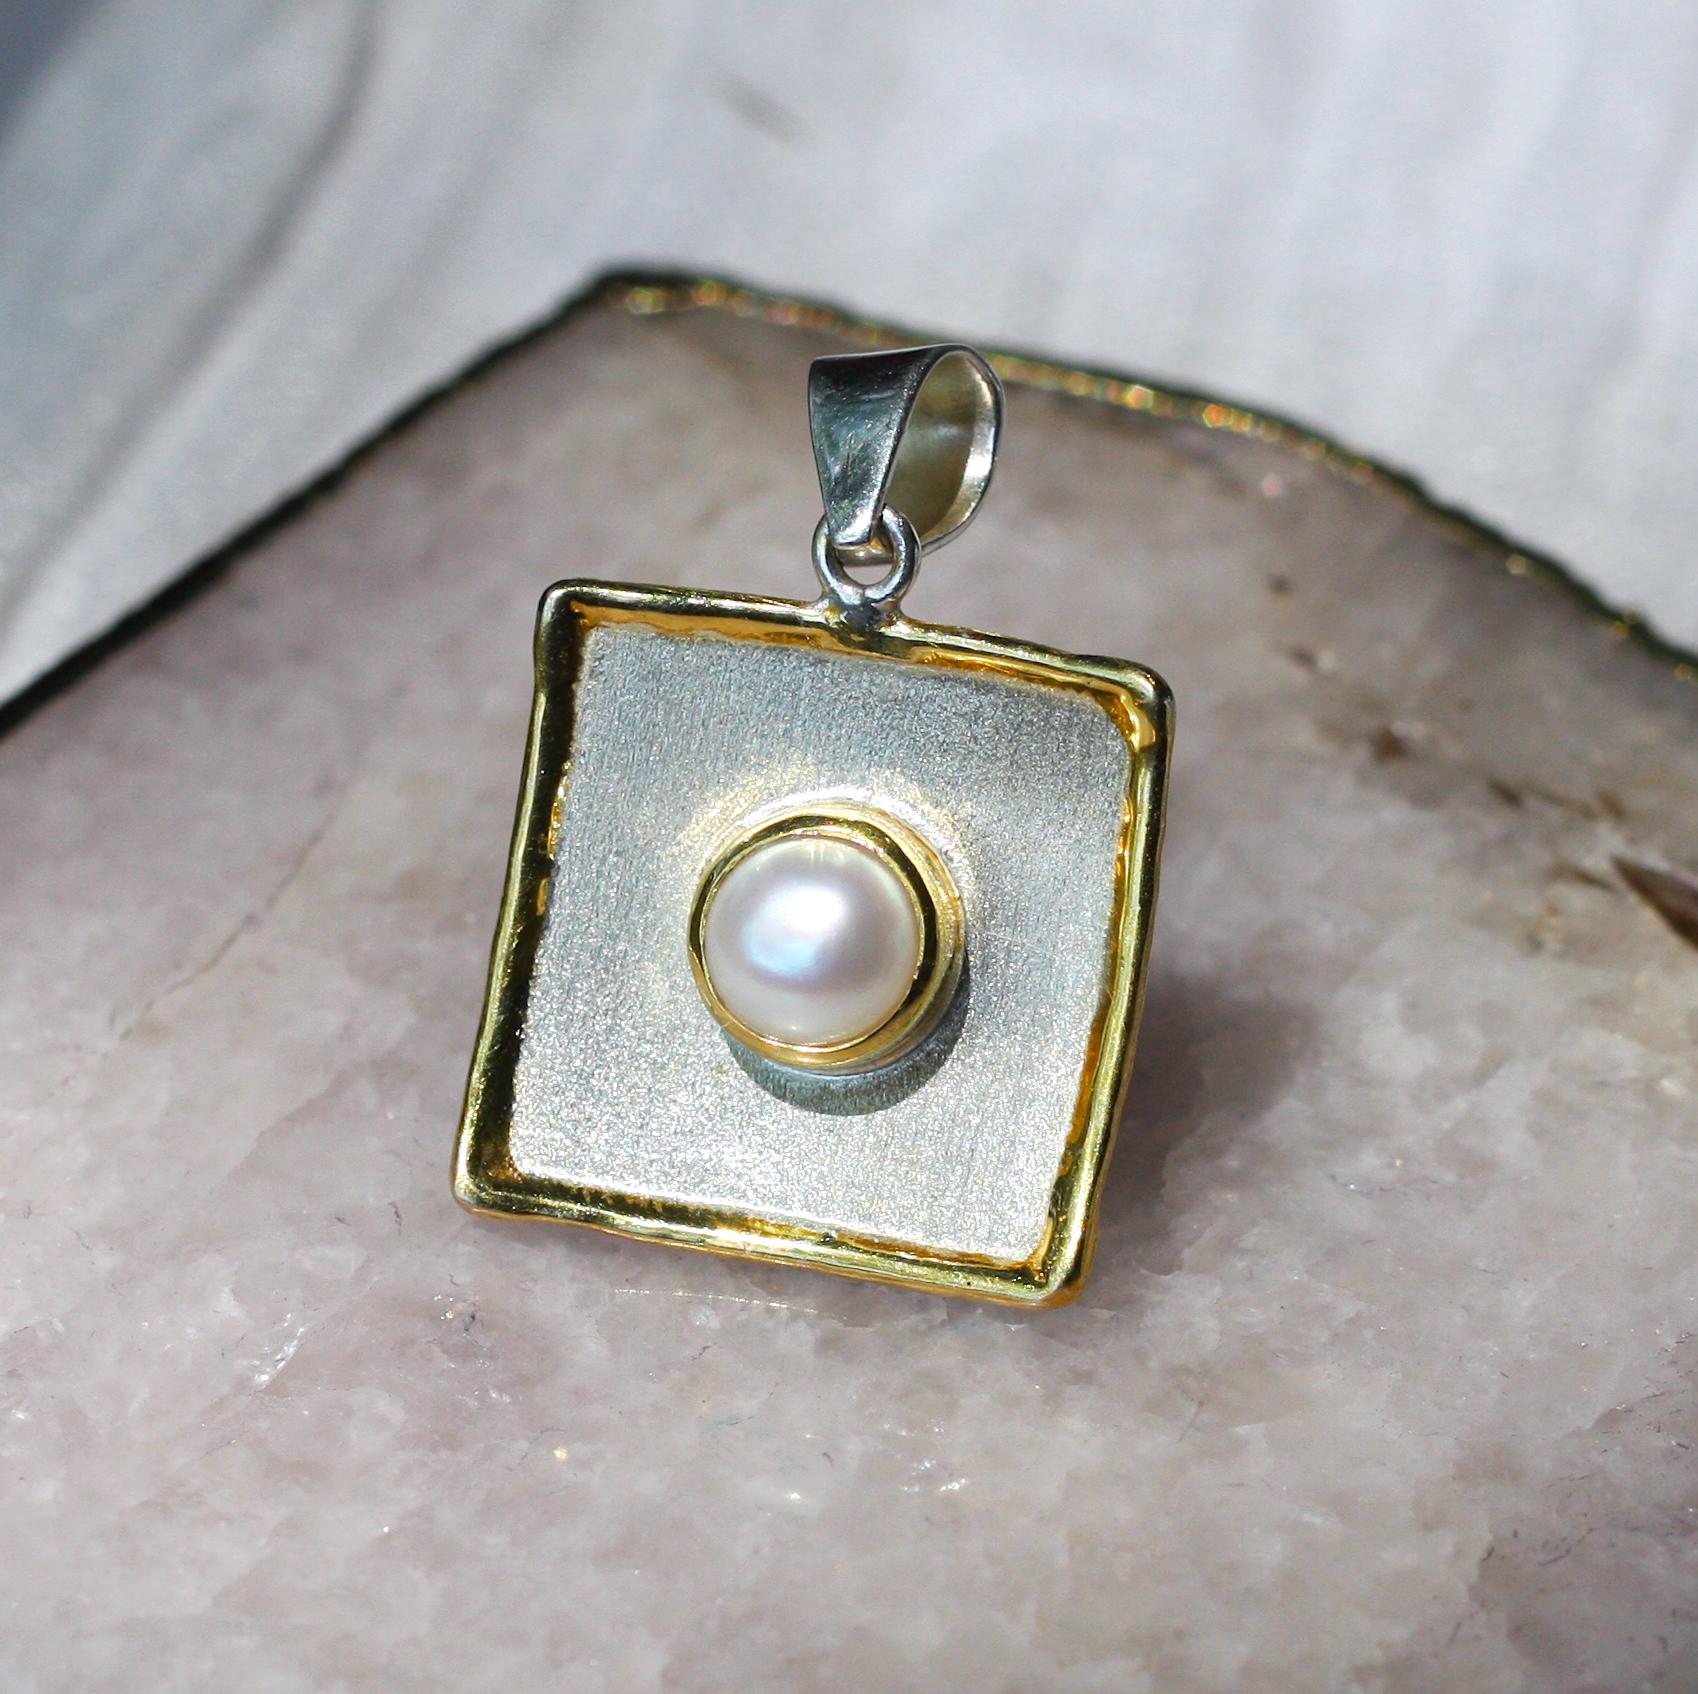 This is Yianni Creations handmade artisan slide from Midas Collection crafted in Greece from fine silver 950 purity and plated with palladium to resist the elements. This square-shaped dangle pendant features 7MM freshwater pearl. The unique look is